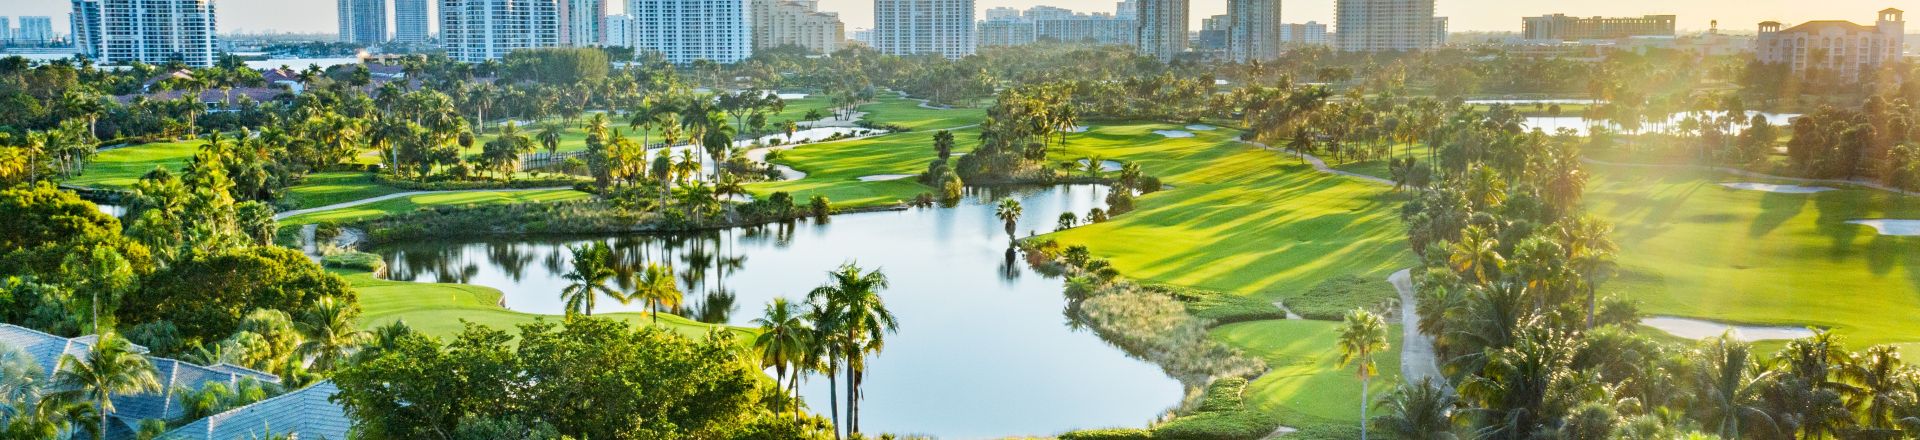 Discover the epitome of luxury golf at The Soffer Golf Course, JW Marriott Miami Turnberry Resort. This image encapsulates the essence of a world-class golfing experience, with meticulously manicured fairways set against the backdrop of Turnberry's upscale ambience.